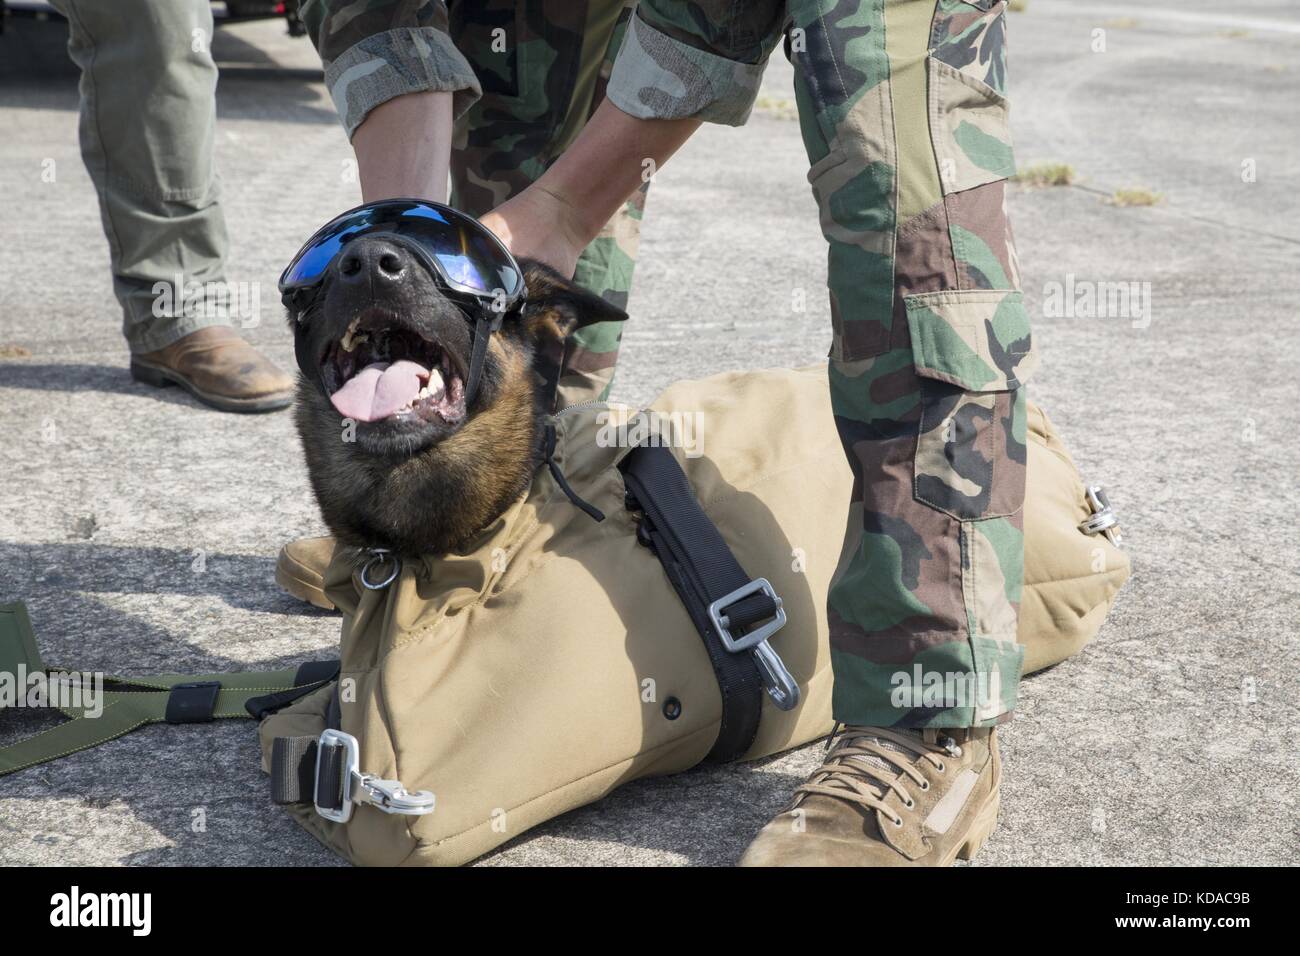 A U.S. Marine Corps canine handler soldier prepares his military working dog for a parachute jump at the Marine Corps Base Camp Lejeune September 10, 2015 in Jacksonville, North Carolina. Stock Photo